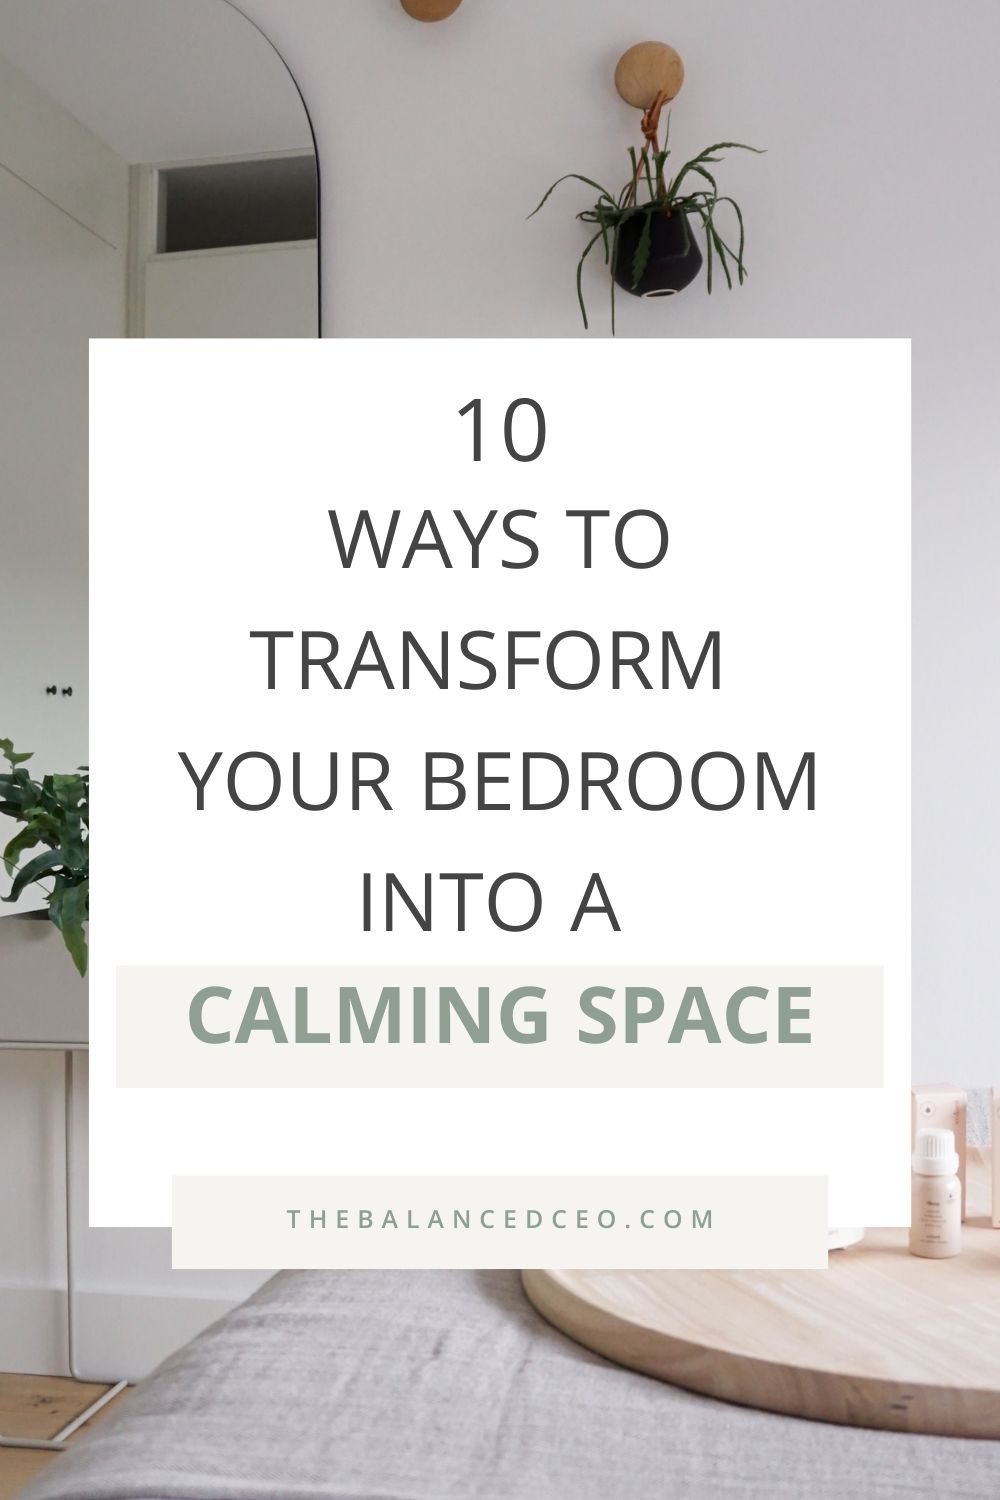 10 Ways to Transform Your Bedroom Into a Calming Space